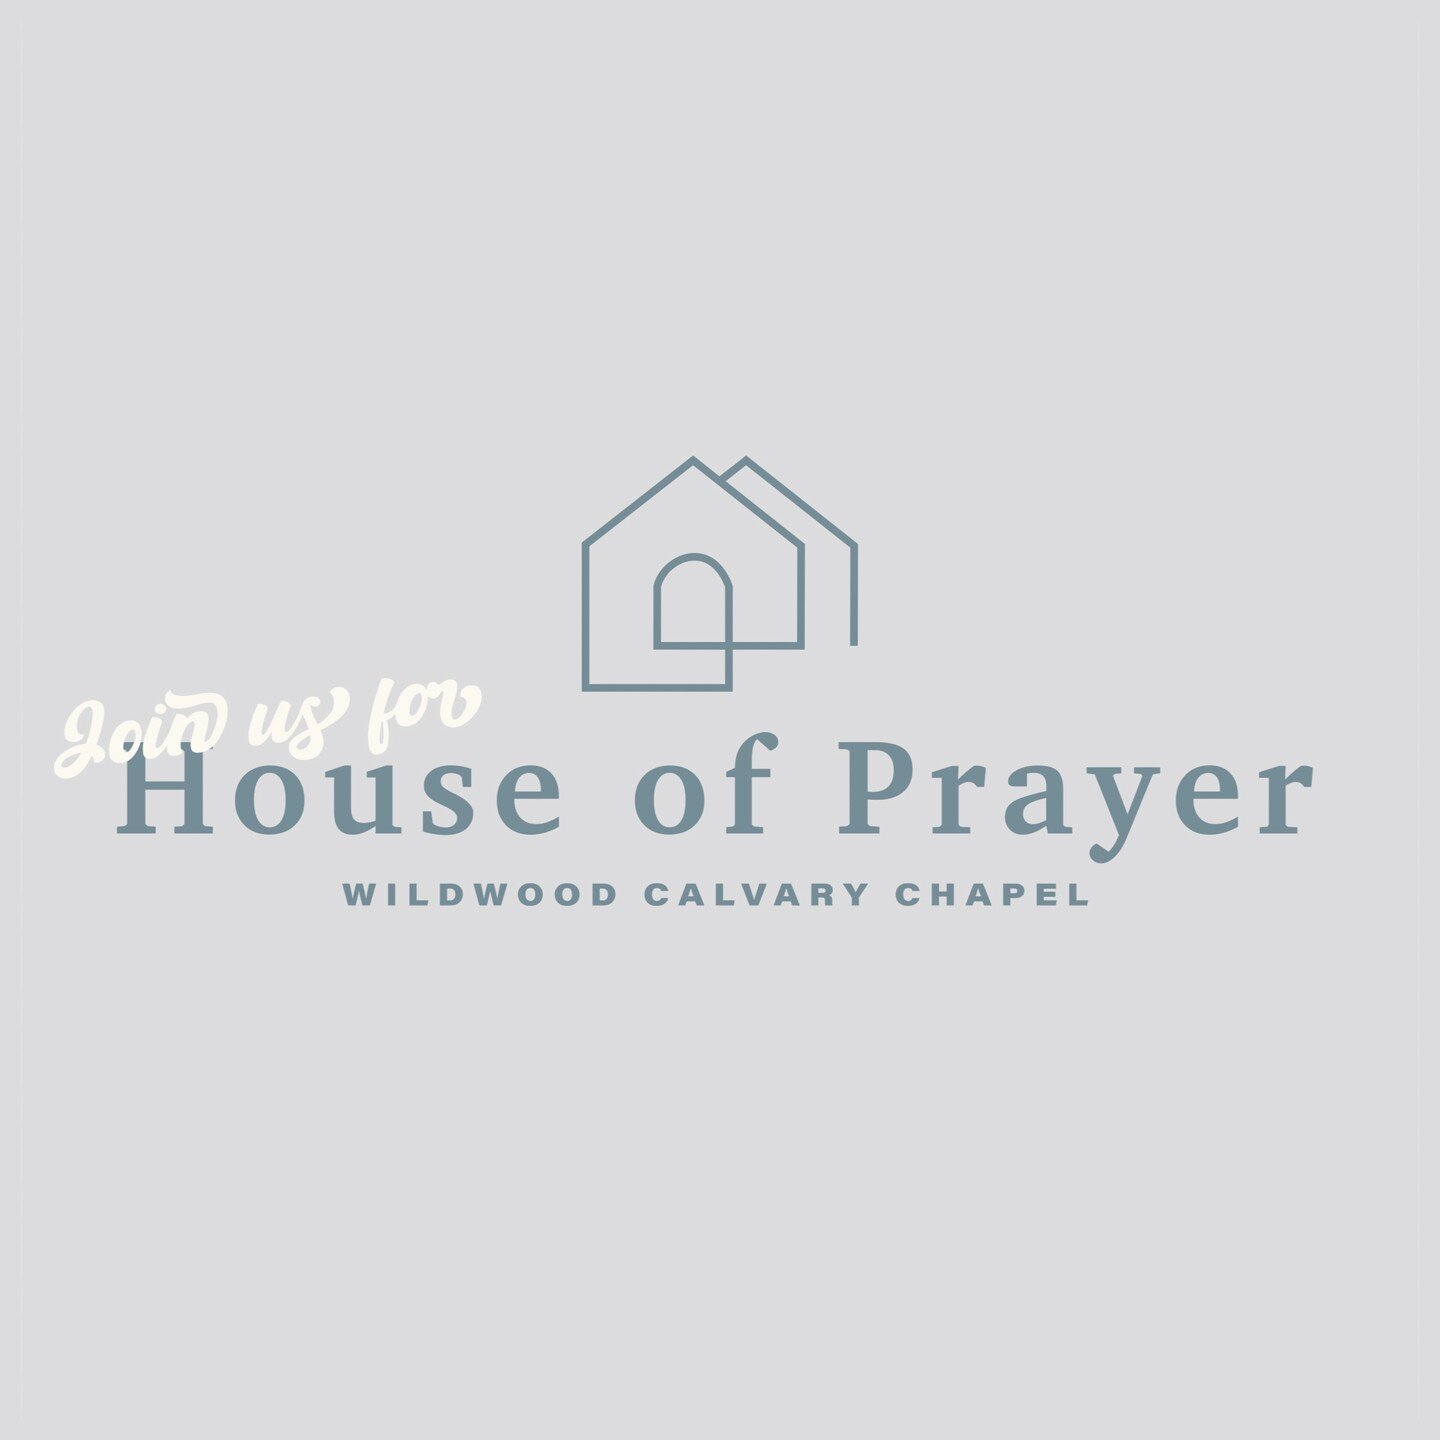 Tonight is the first Wednesday of the month, which means... House of Prayer! We will meet in the Student Ministry Building beforehand and head up together. We hope that you can join us!